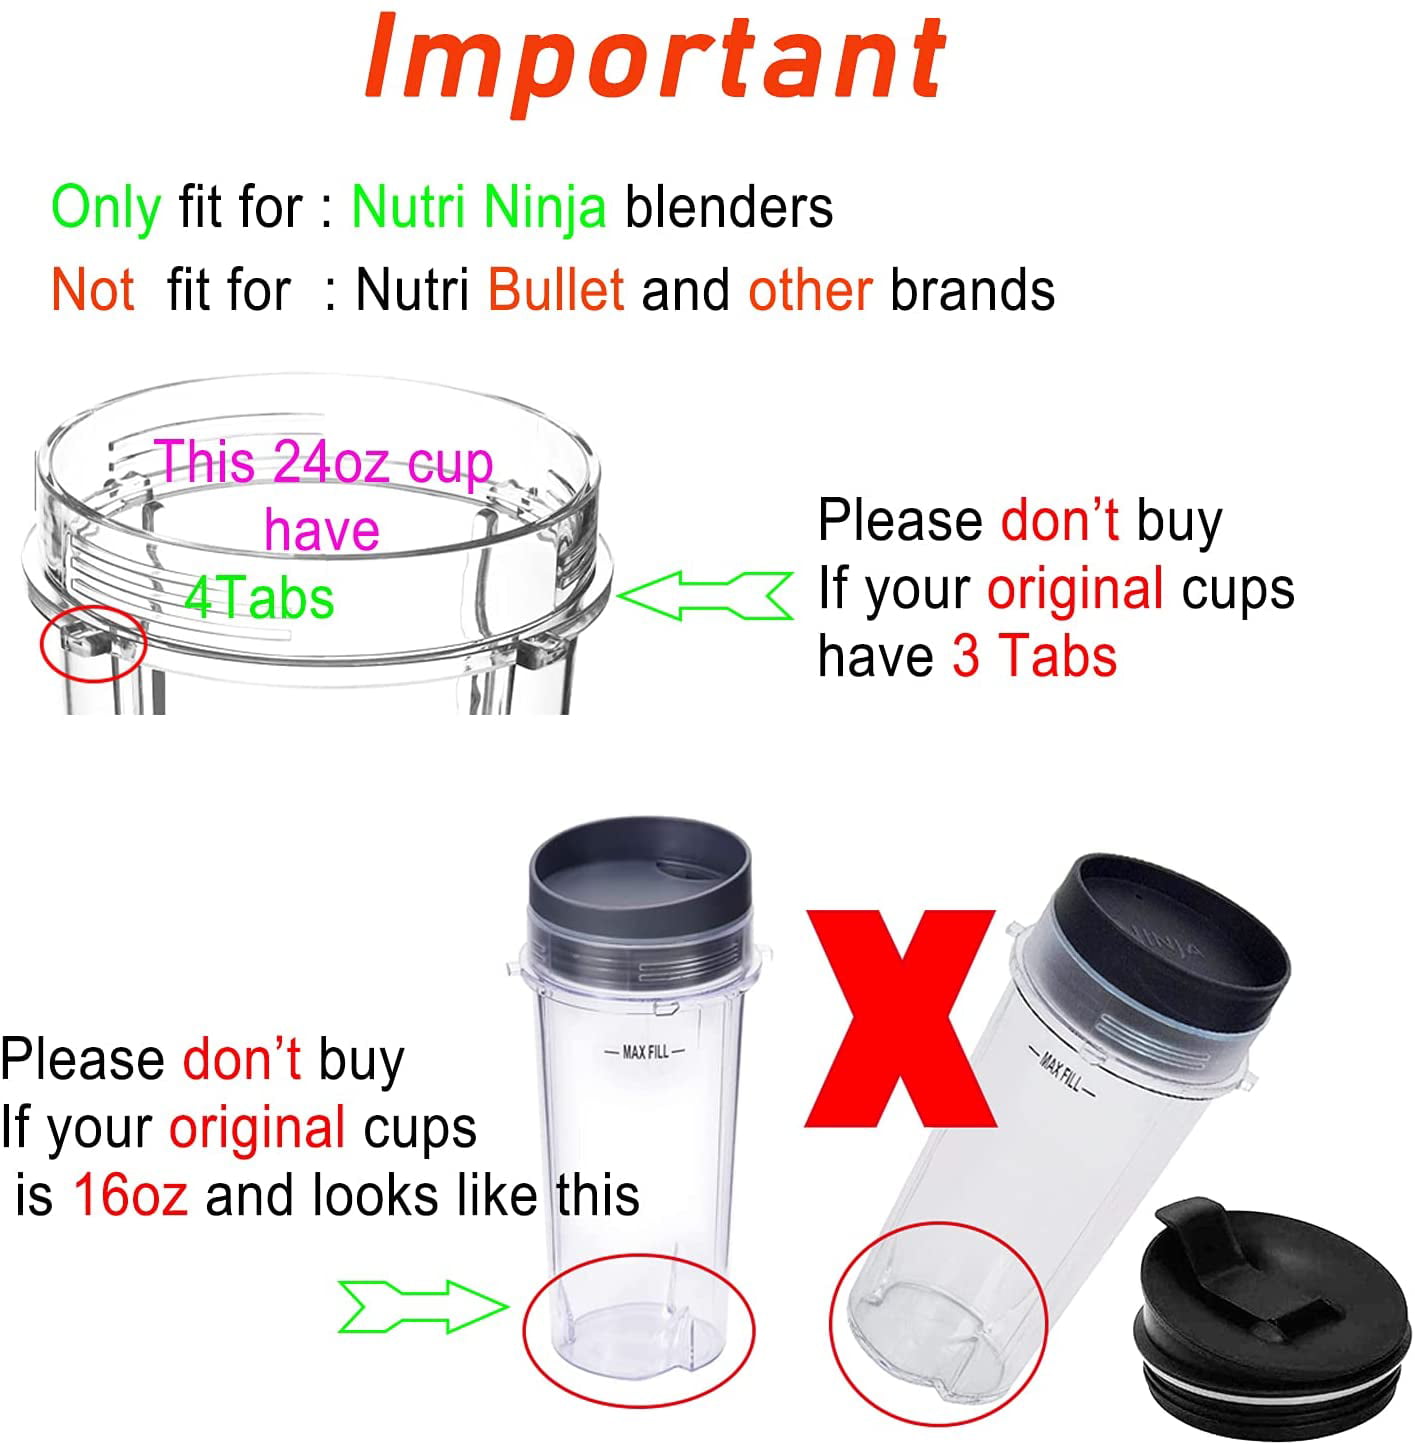 Queentrade B07BGT8ZXM 601593078324 Parts,QT 2Packs Ninja Replacement Sip and Seal Lids,950ML(32oz) Measuring Scale Cup Mug, Fit for Nutri Ninj, 17.2